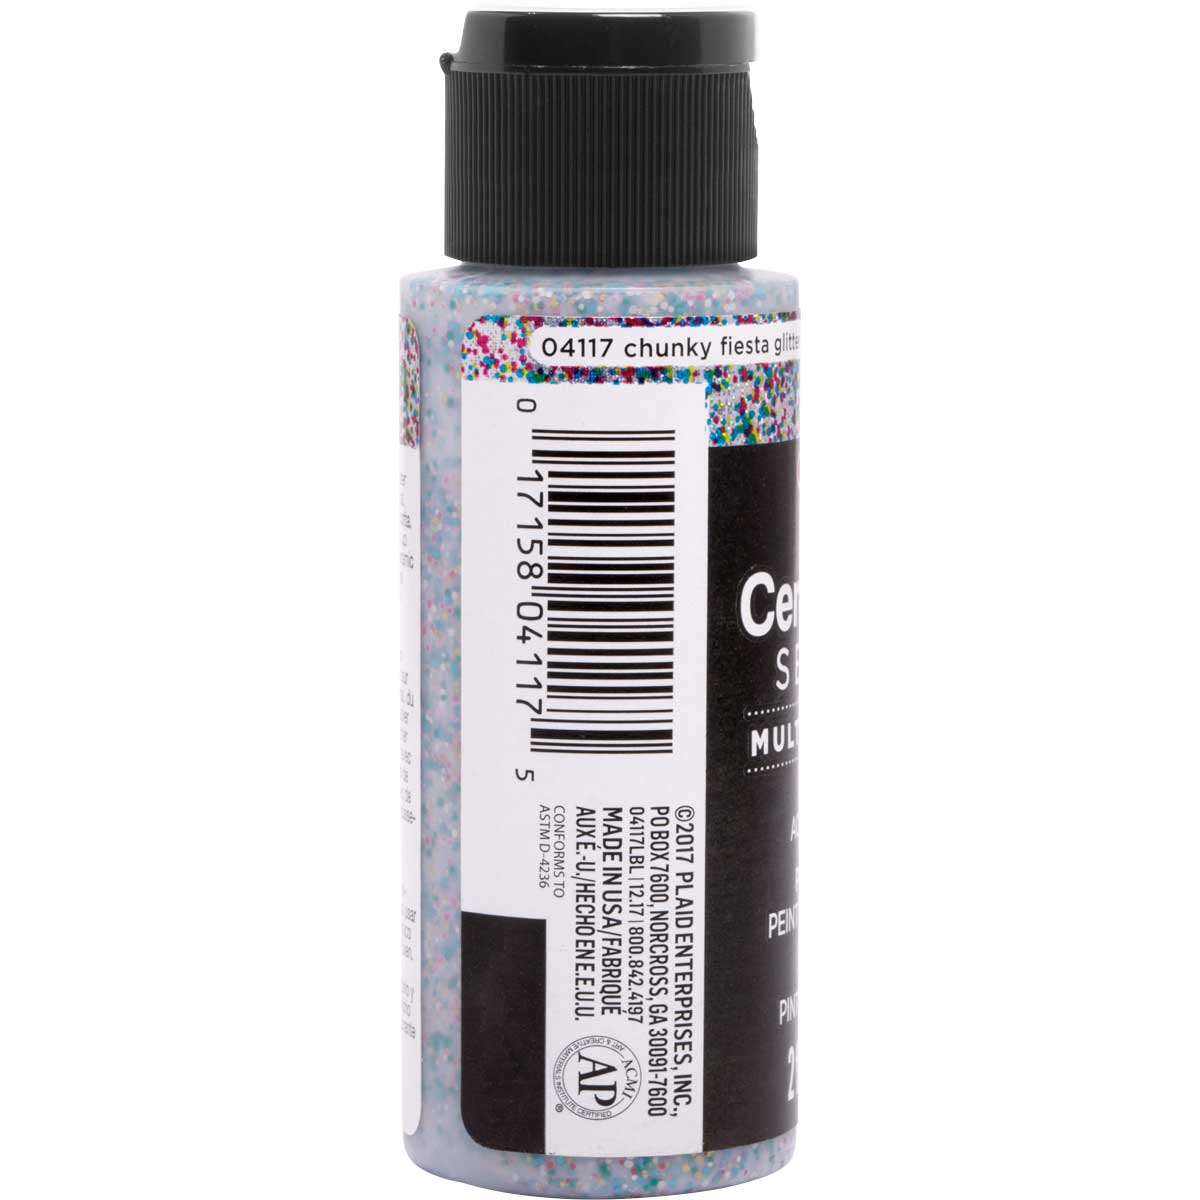 Delta Ceramcoat ® Select Multi-Surface Acrylic Paint - Glitter - Chunky Fiesta Silver, 2 oz. - 04117